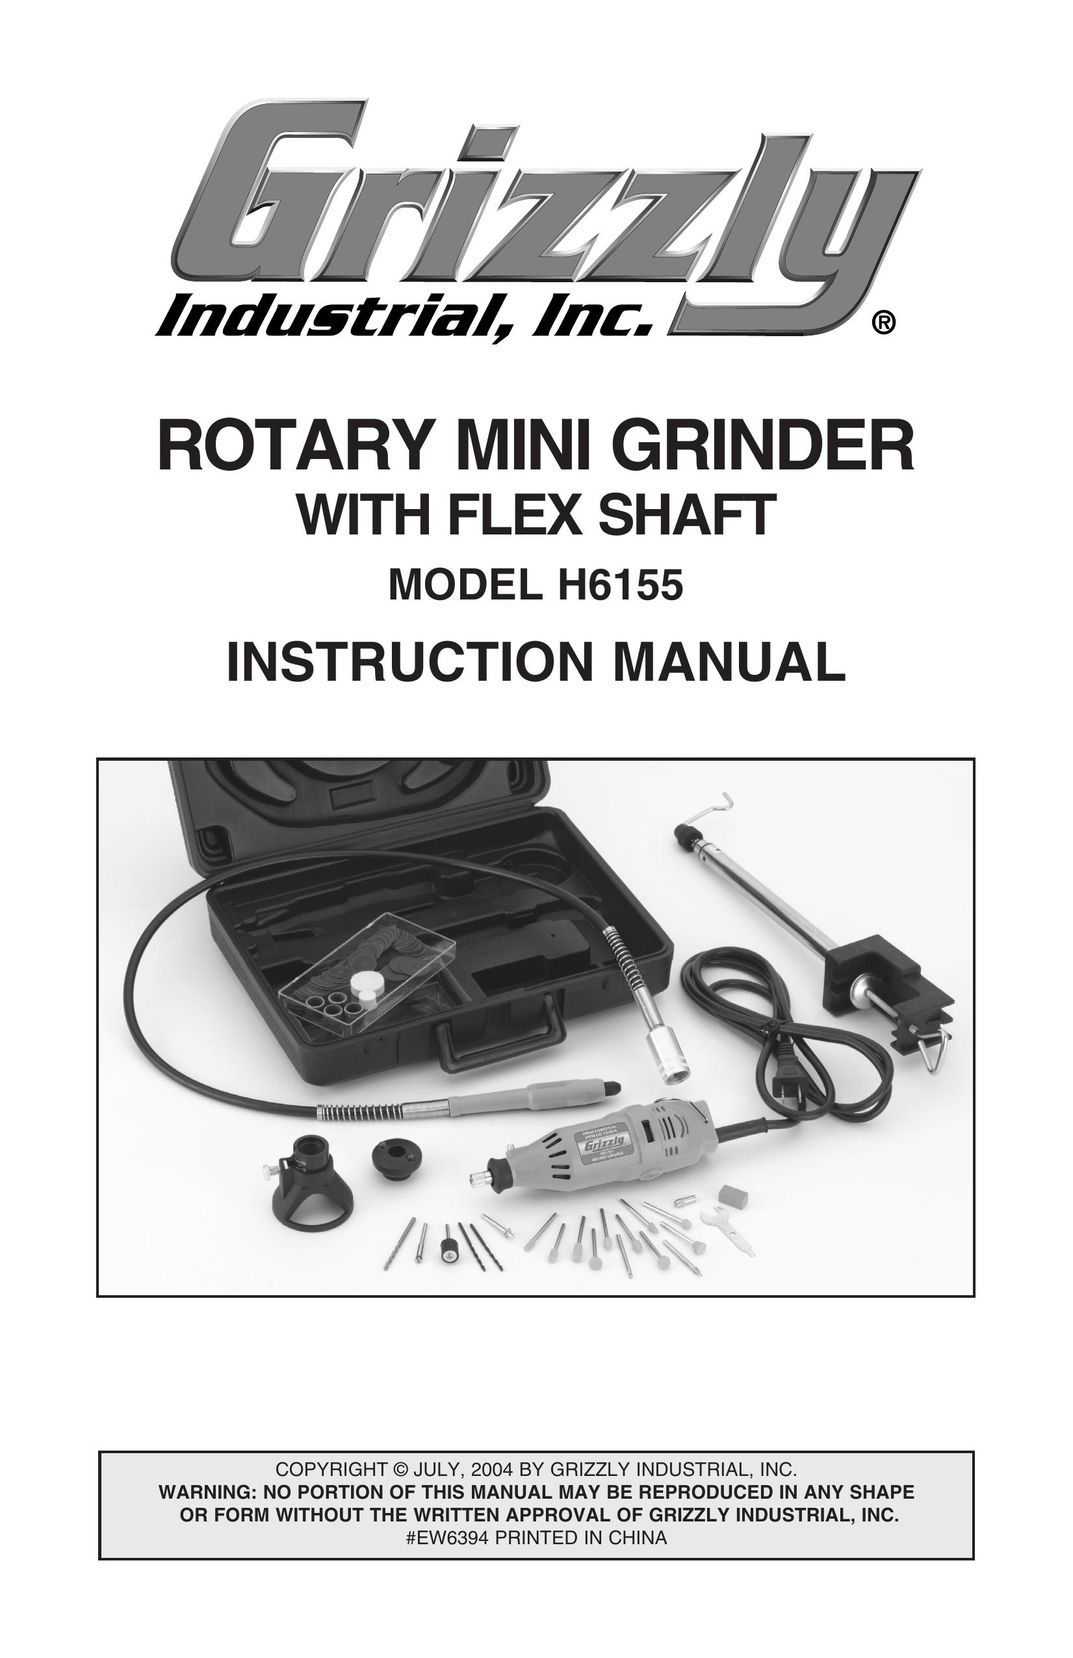 Grizzly H6155 Grinder User Manual